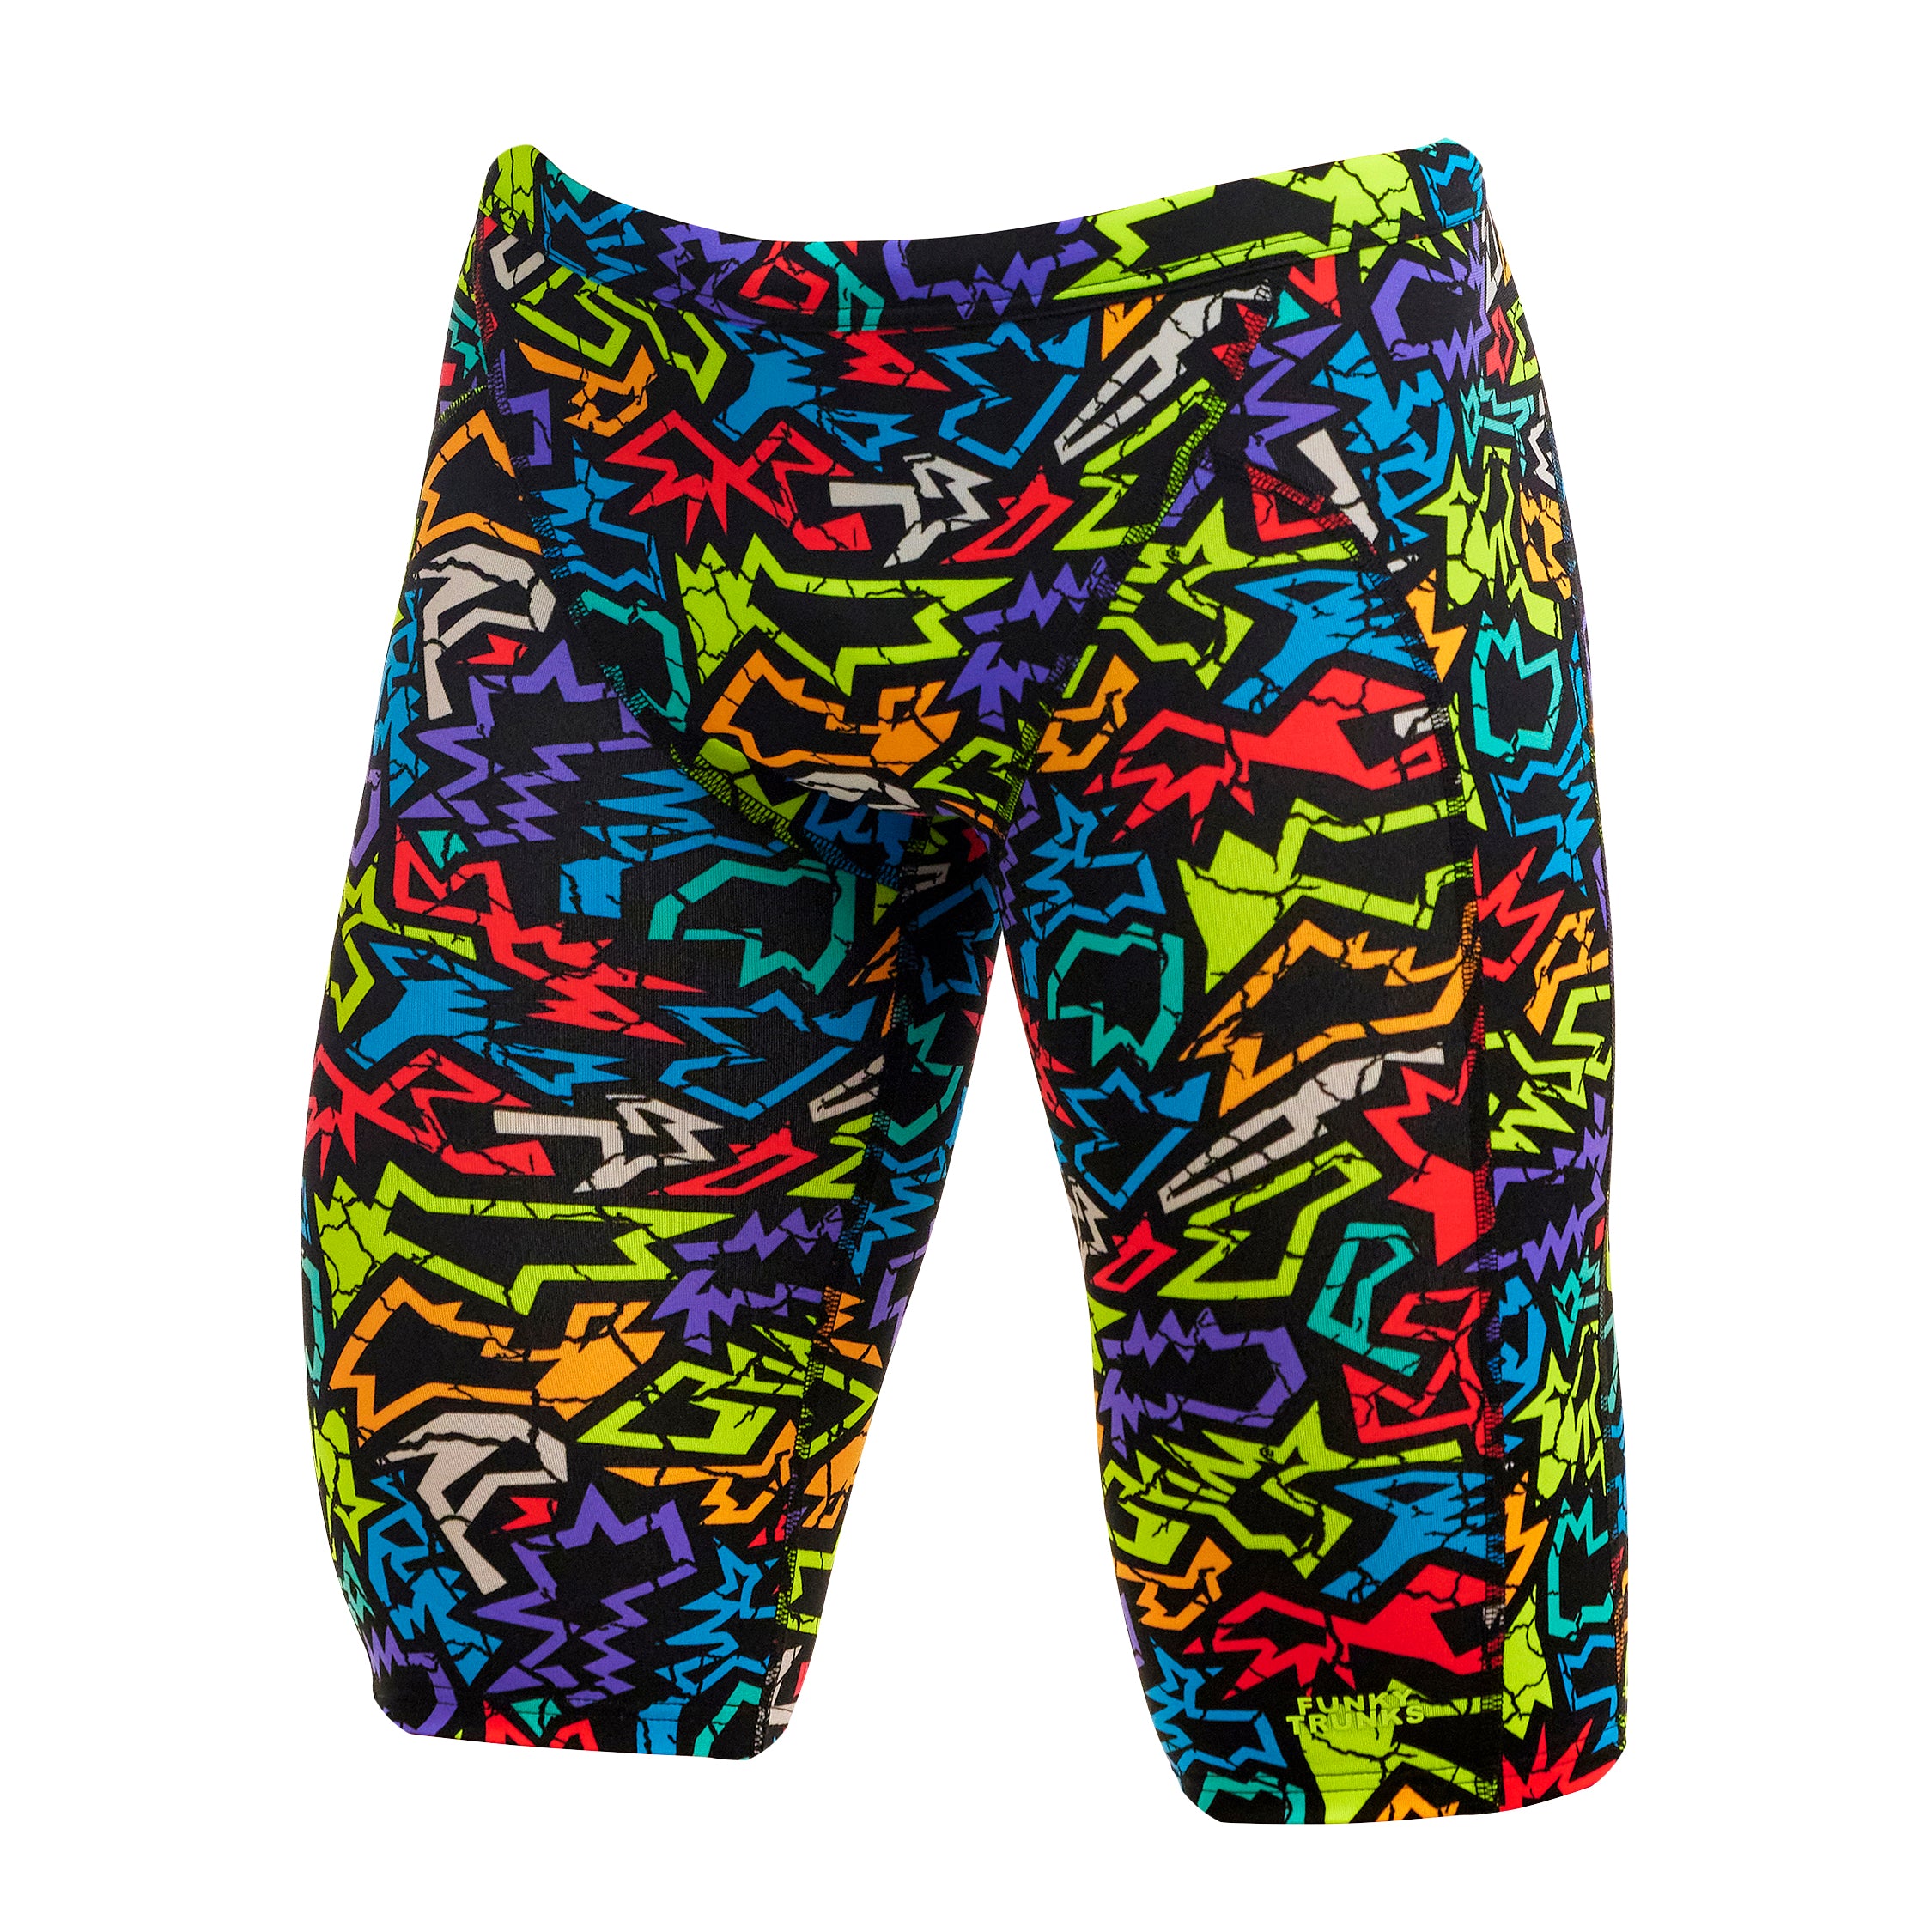 Funky Trunks - Funk Me - Boys Eco Training Jammers